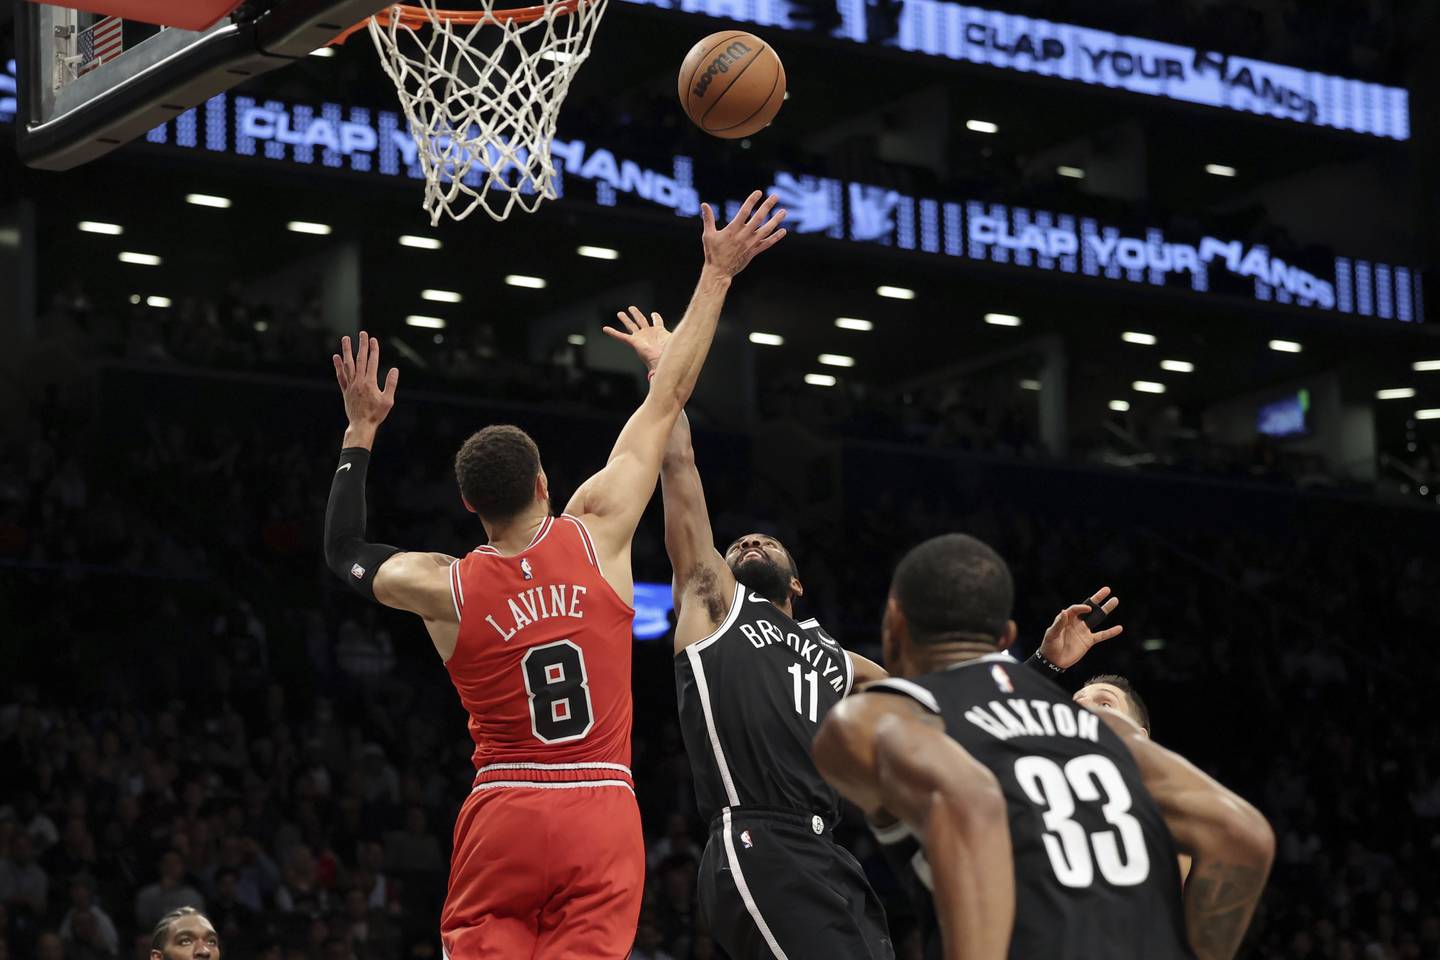 Bulls guard Zach LaVine (8) defends Nets guard Kyrie Irving (11) as Nets forward Nic Claxton (33) watches during the second half Tuesday, Nov. 1, 2022, in New York.